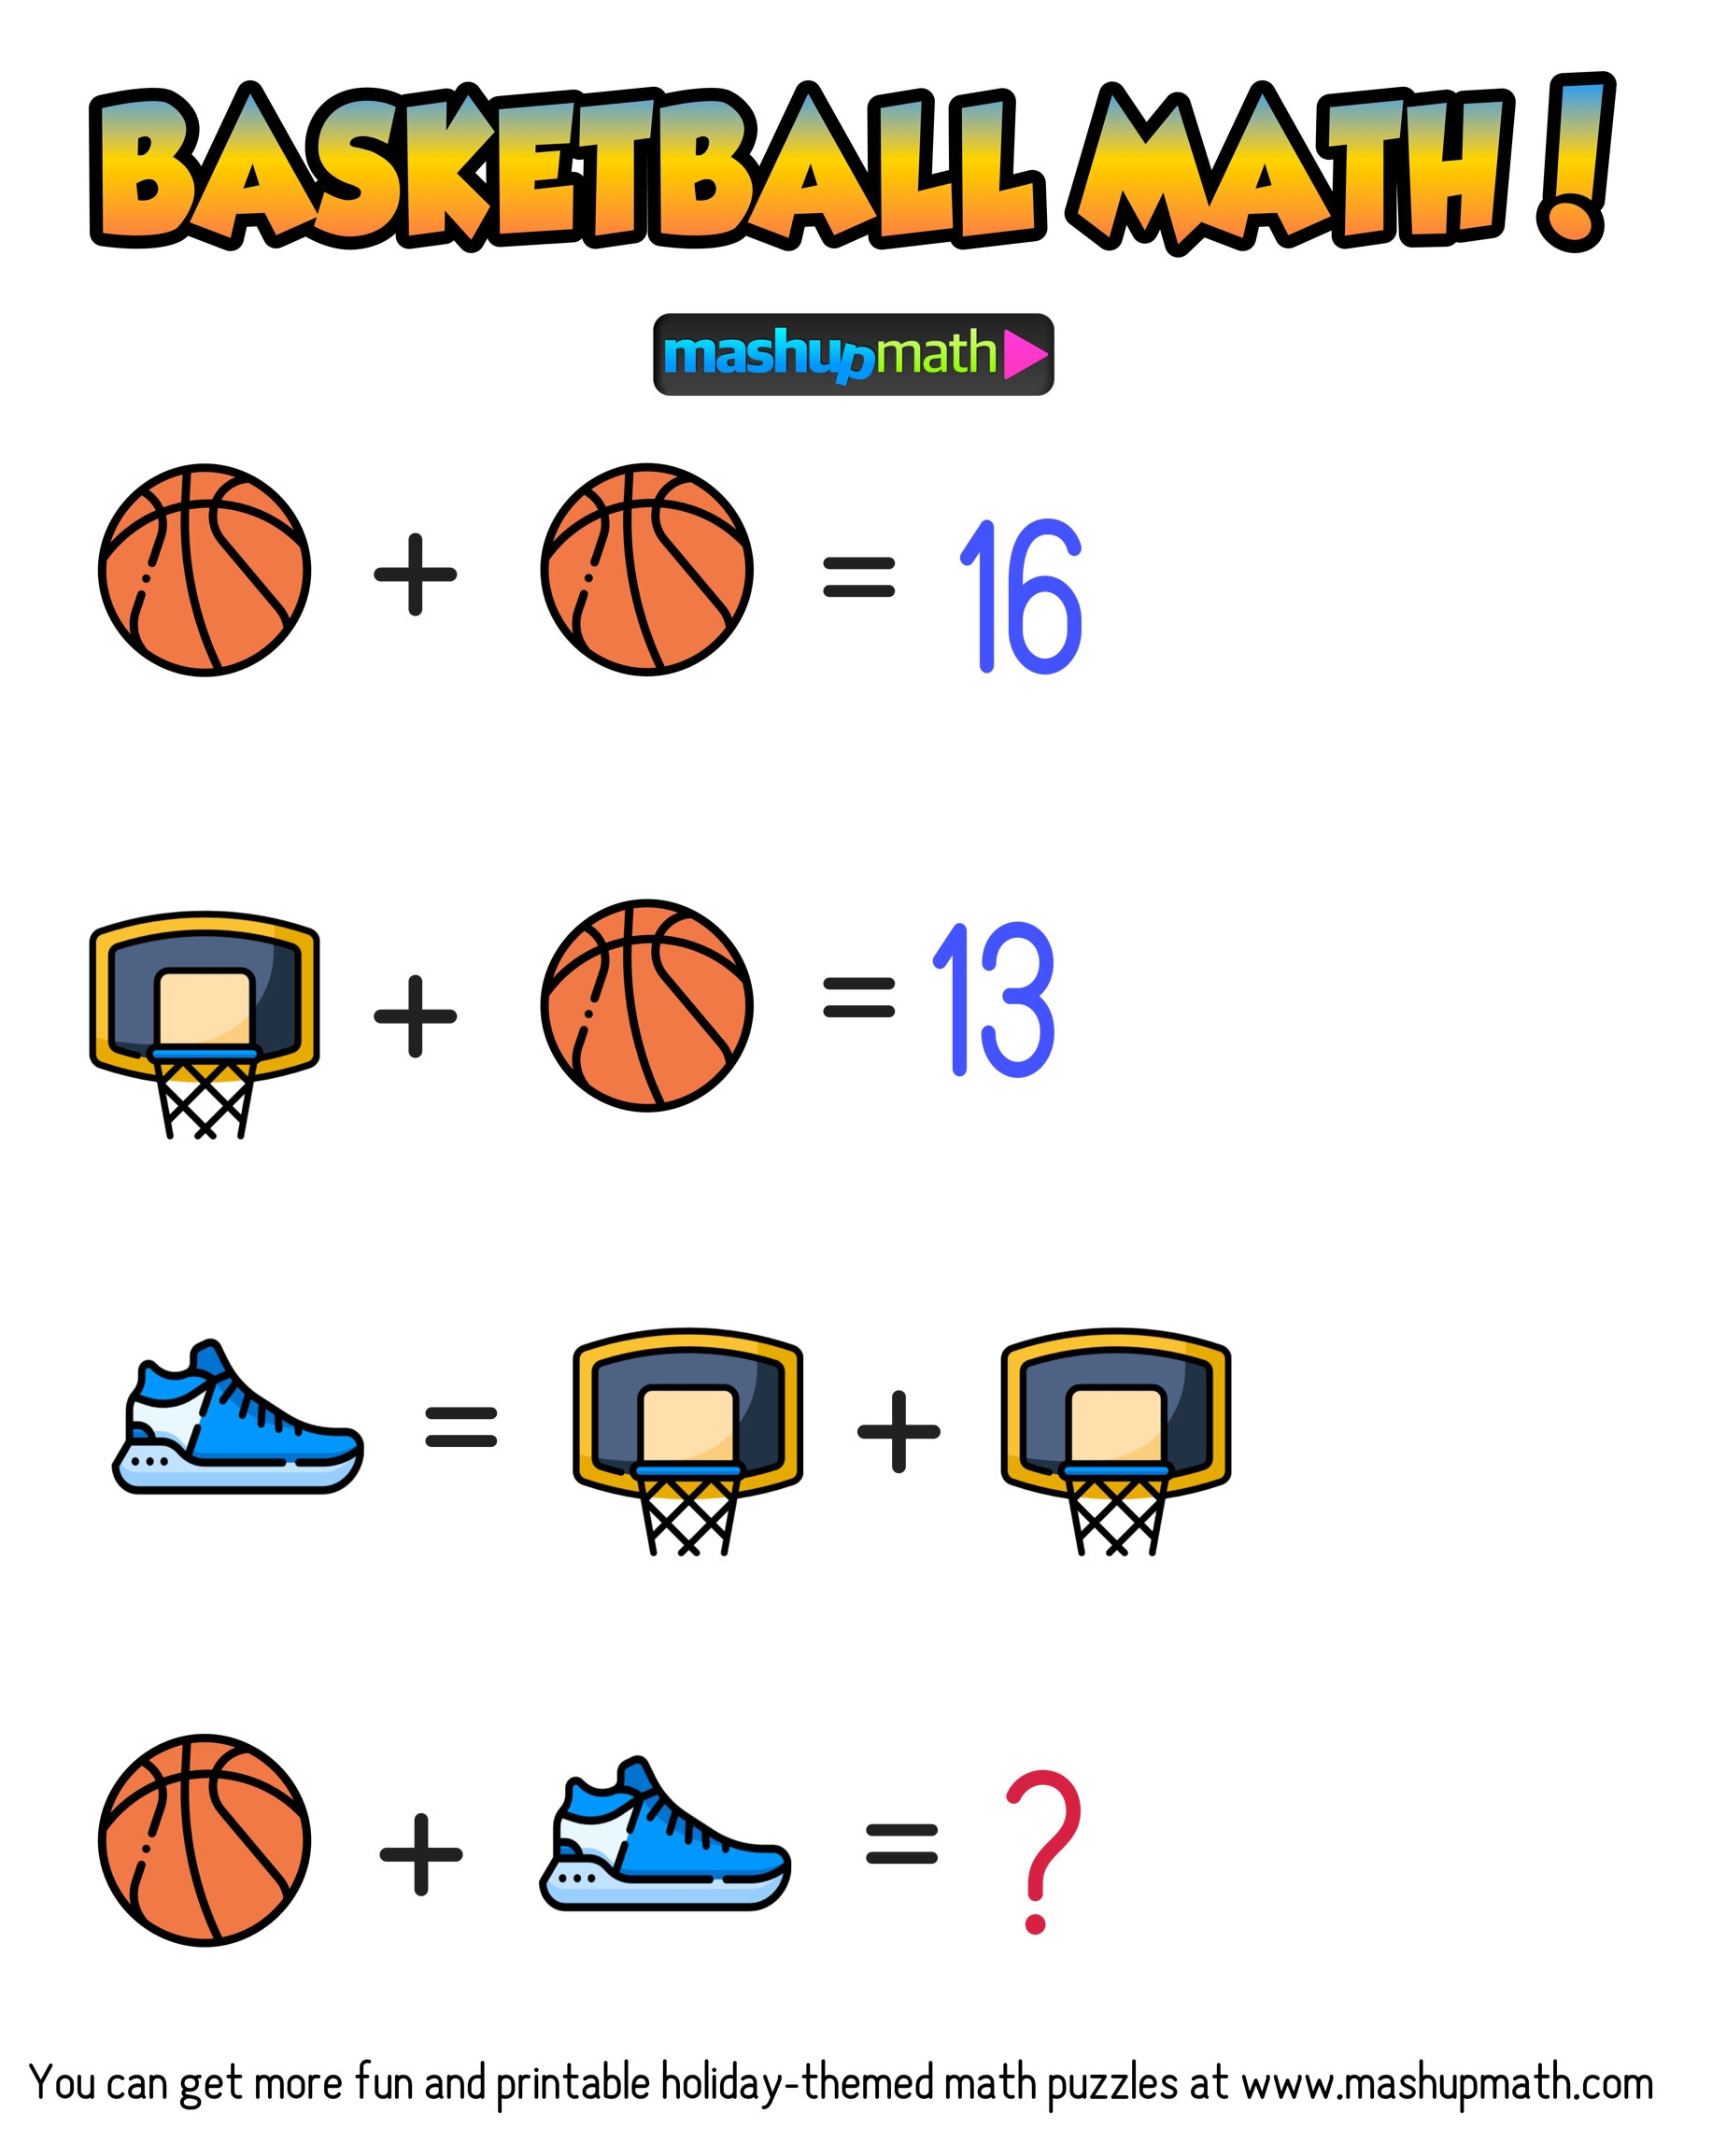 are-your-kids-ready-for-these-basketball-math-puzzles-mashup-math-math-worksheet-answers